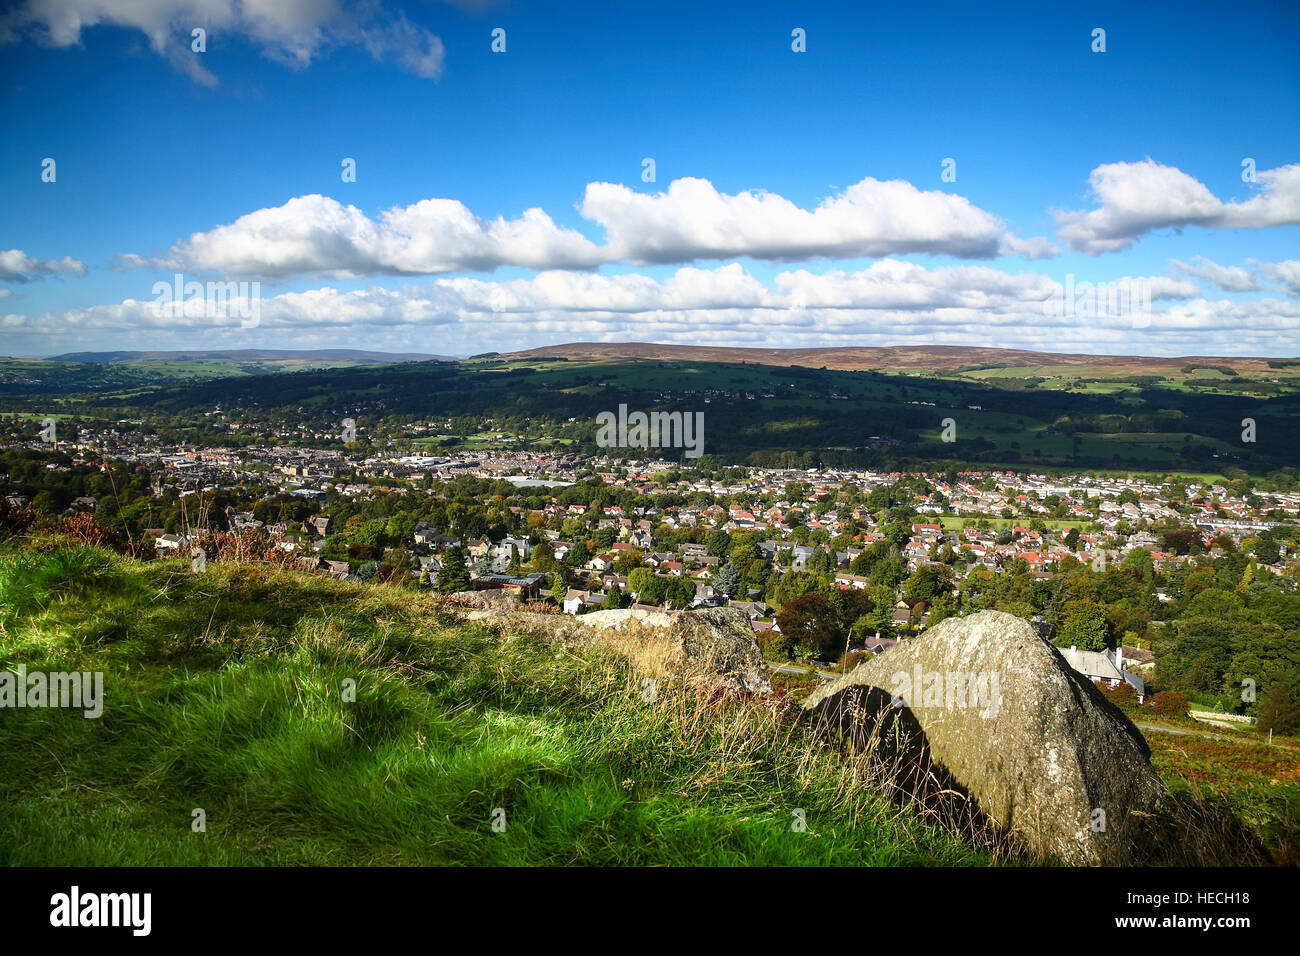 Landscape view looking towards the town of Ilkley on a warm sunny day taken from Ilkley moor Yorkshire England UK Stock Photo